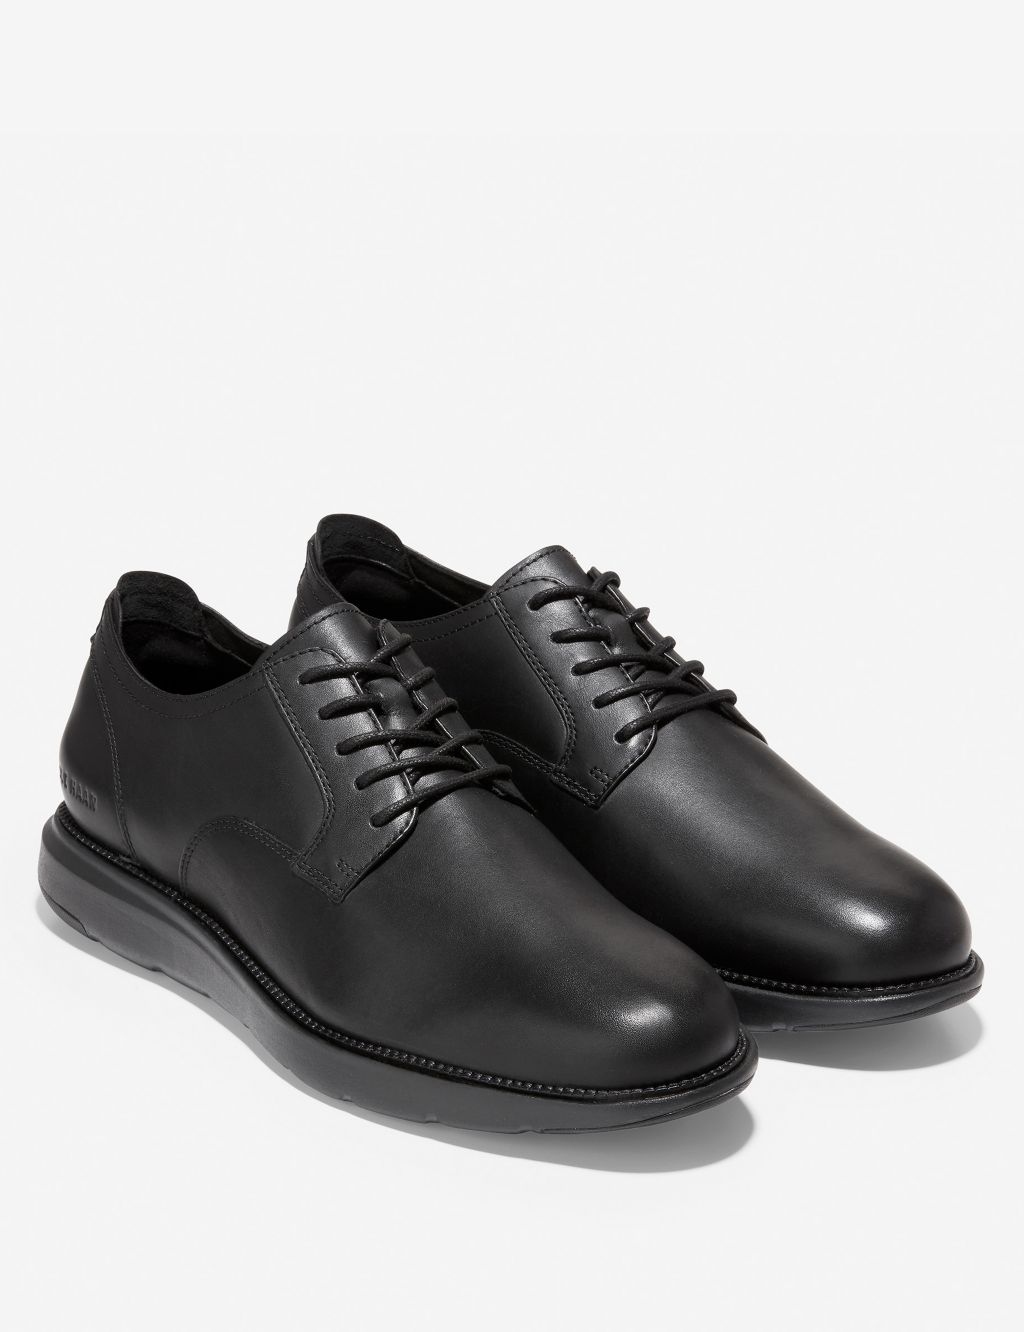 Grand Atlantic Leather Oxford Shoes image 2